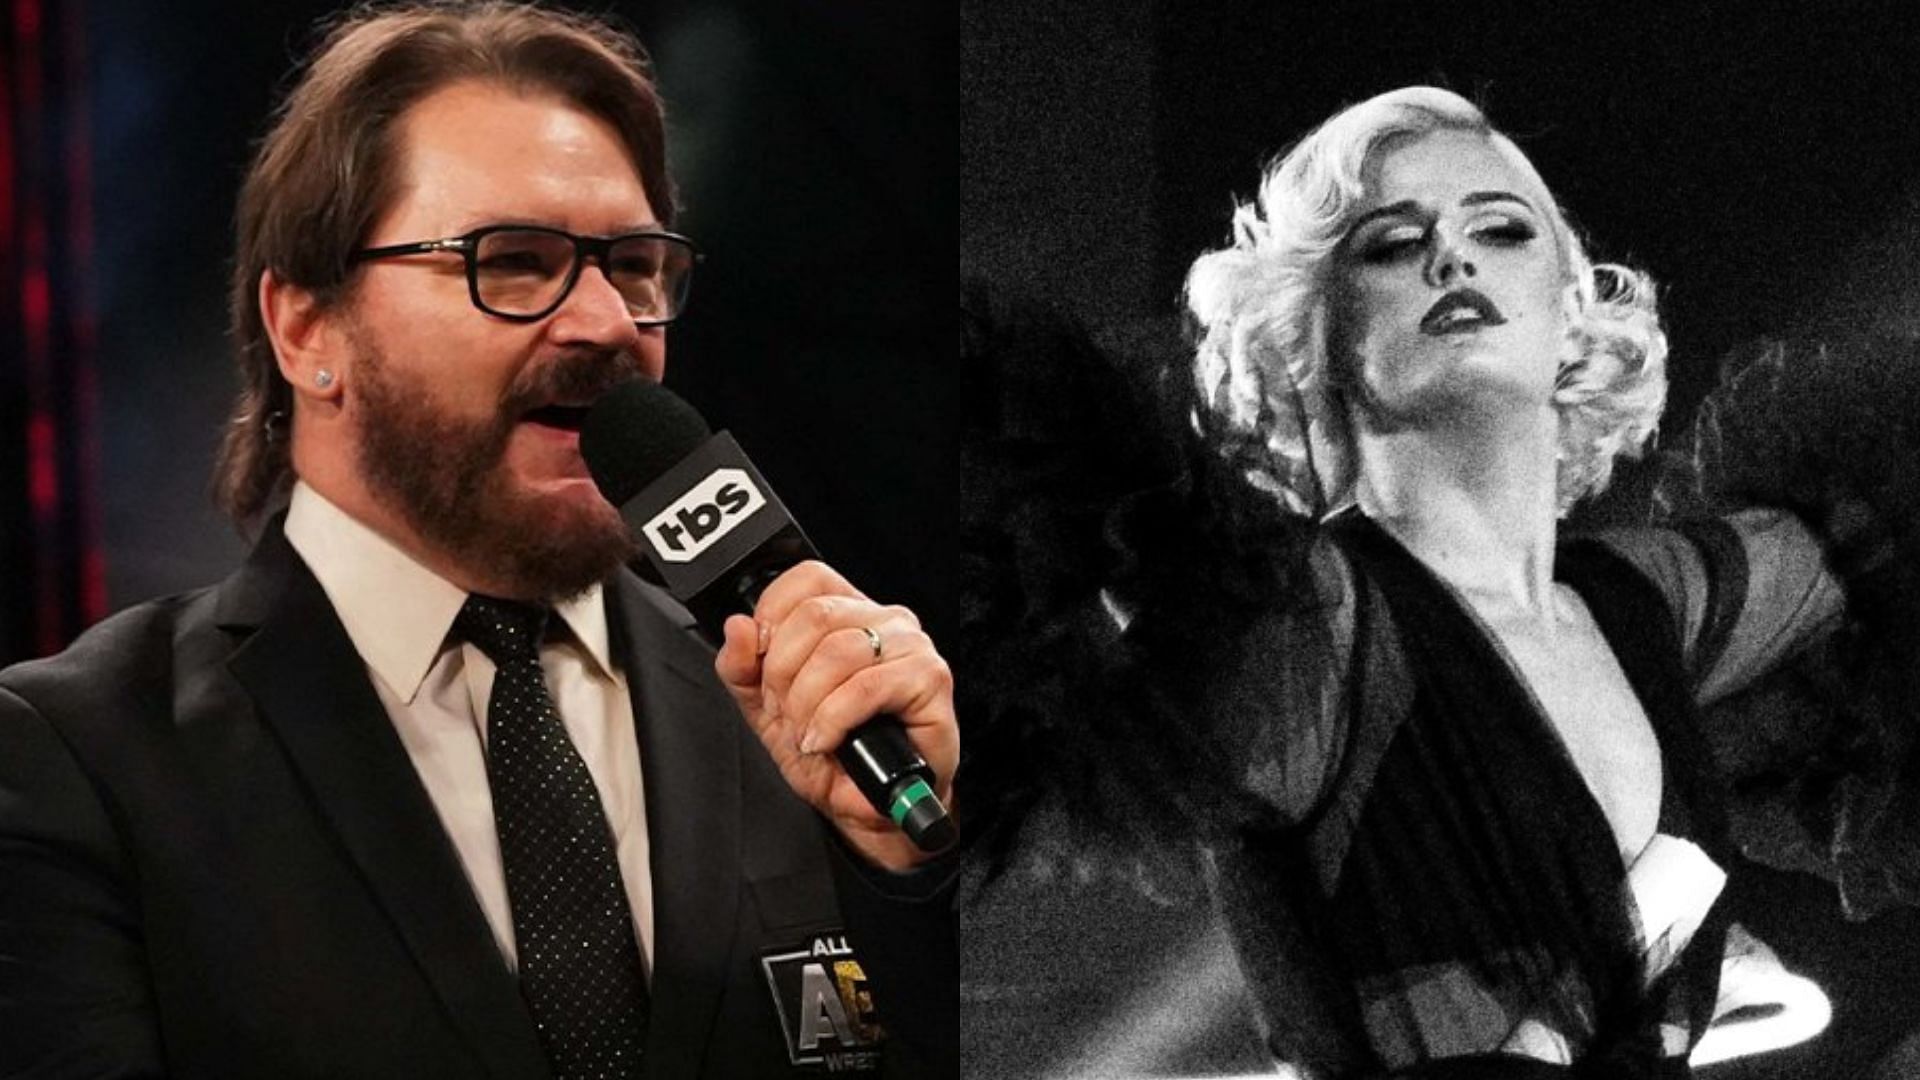 What did Tony Schiavone think about having Toni Storm